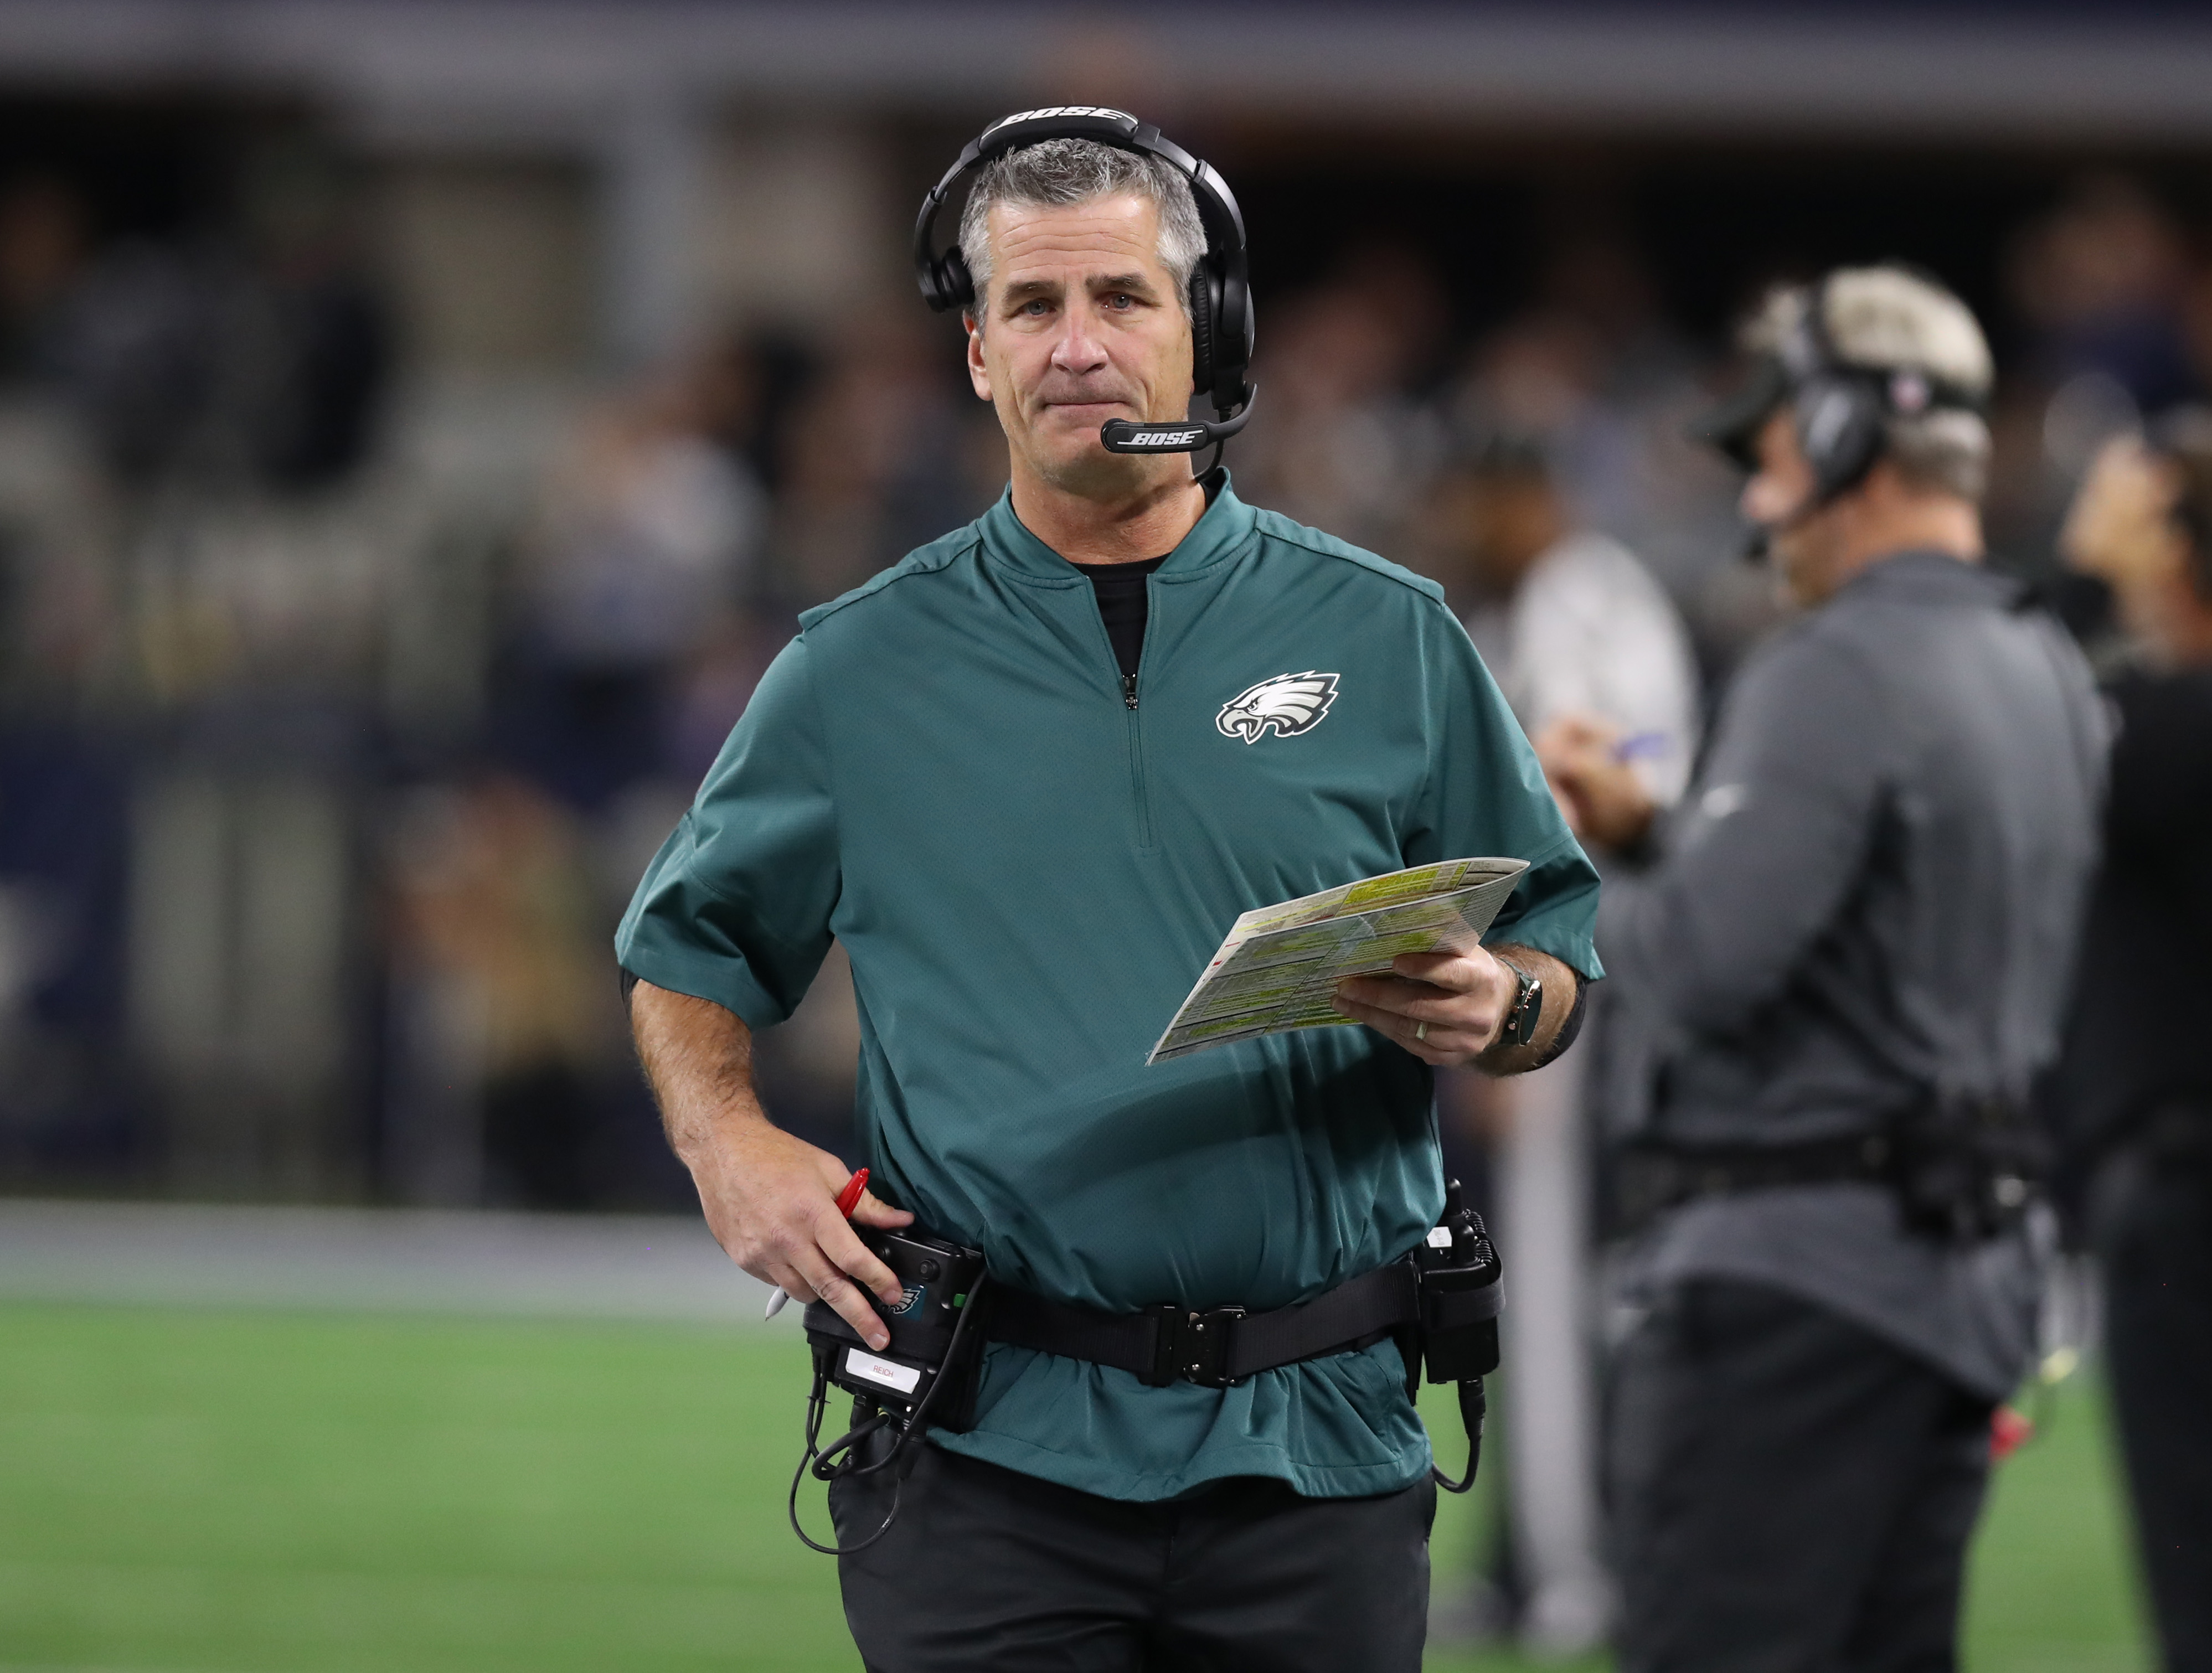 Who are the 5 longest tenured coaches in Eagles history?